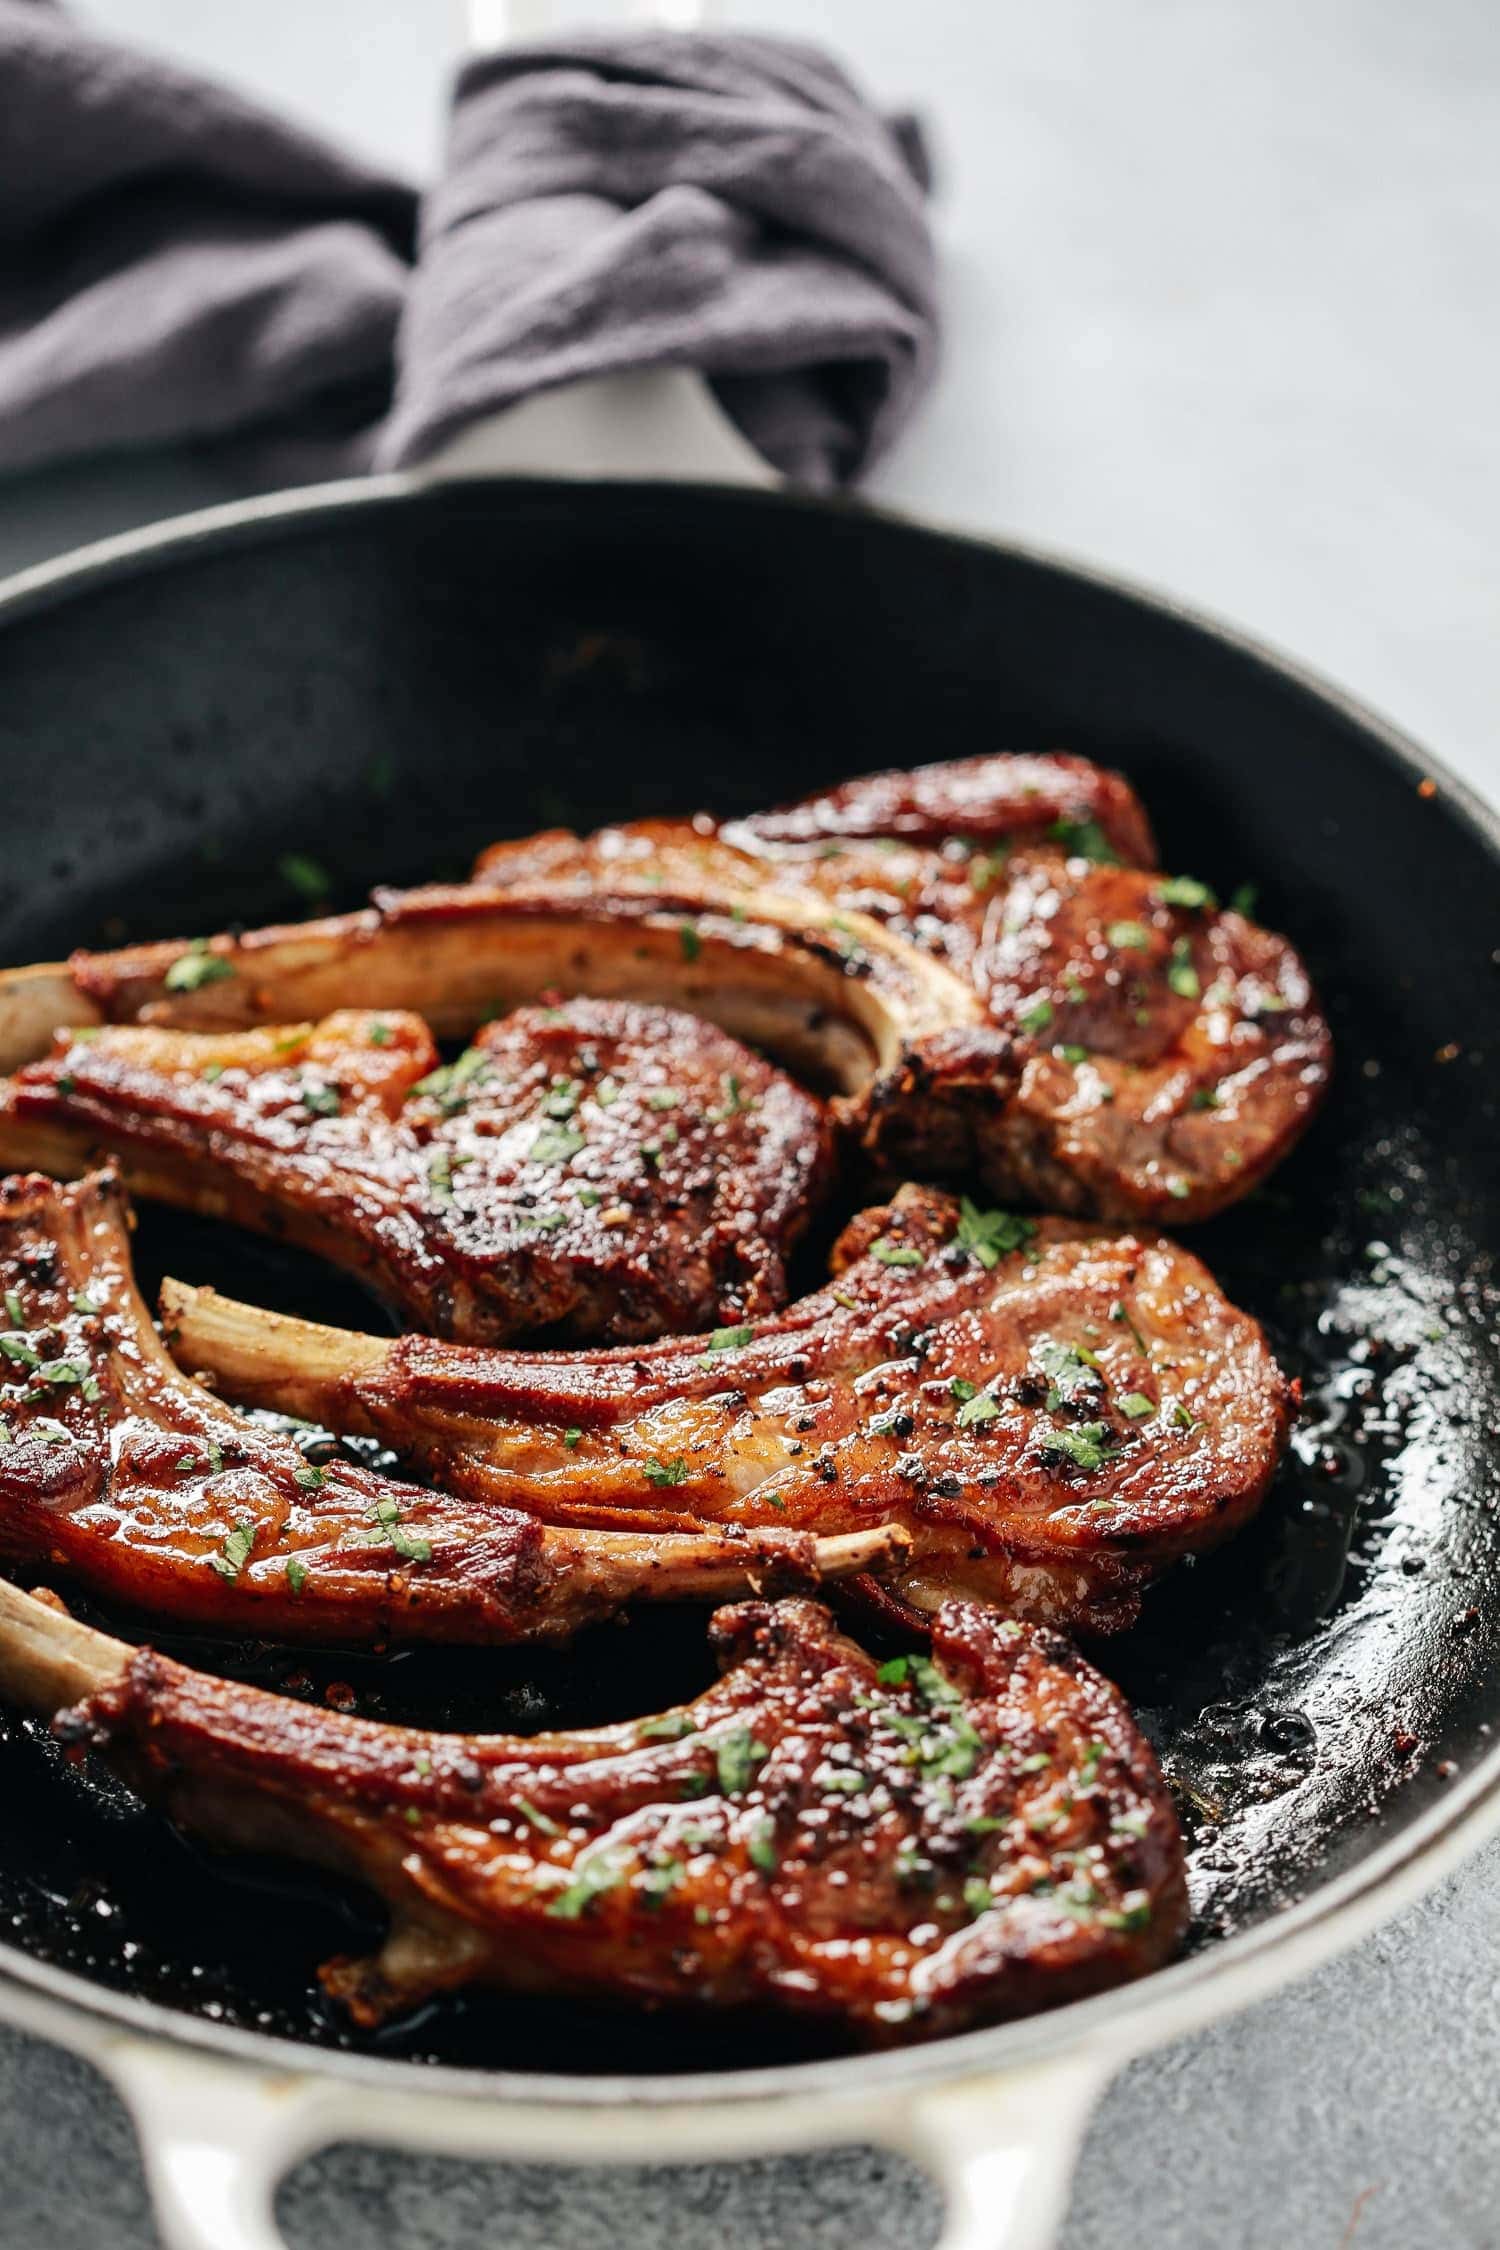 Lamb chops cooked in glorious garlic, butter, and thyme sauce.